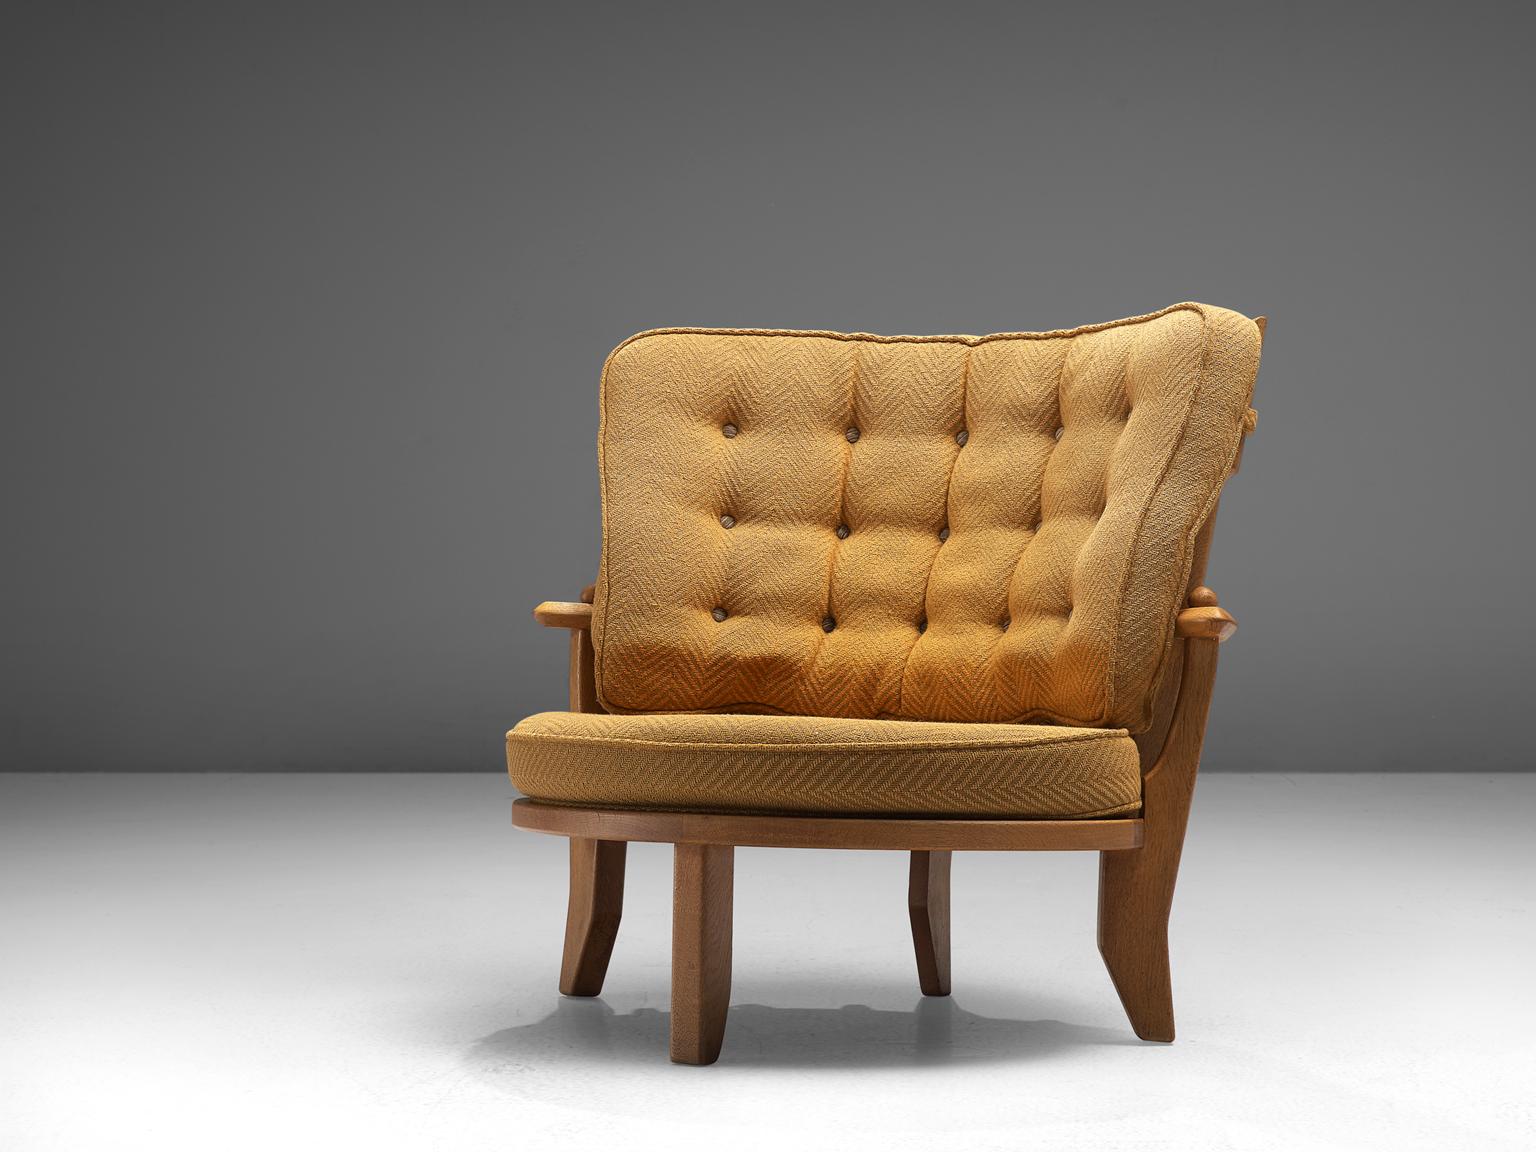 Guillerme et Chambron, lounge chair, oak, yellow upholstery, France, 1950s. 

This lounge chair or loveseat has a Classic Guillerme & Chambron style. It is bulky but beautifully made, with attention to detail and comfort. Guillerme and Chambron